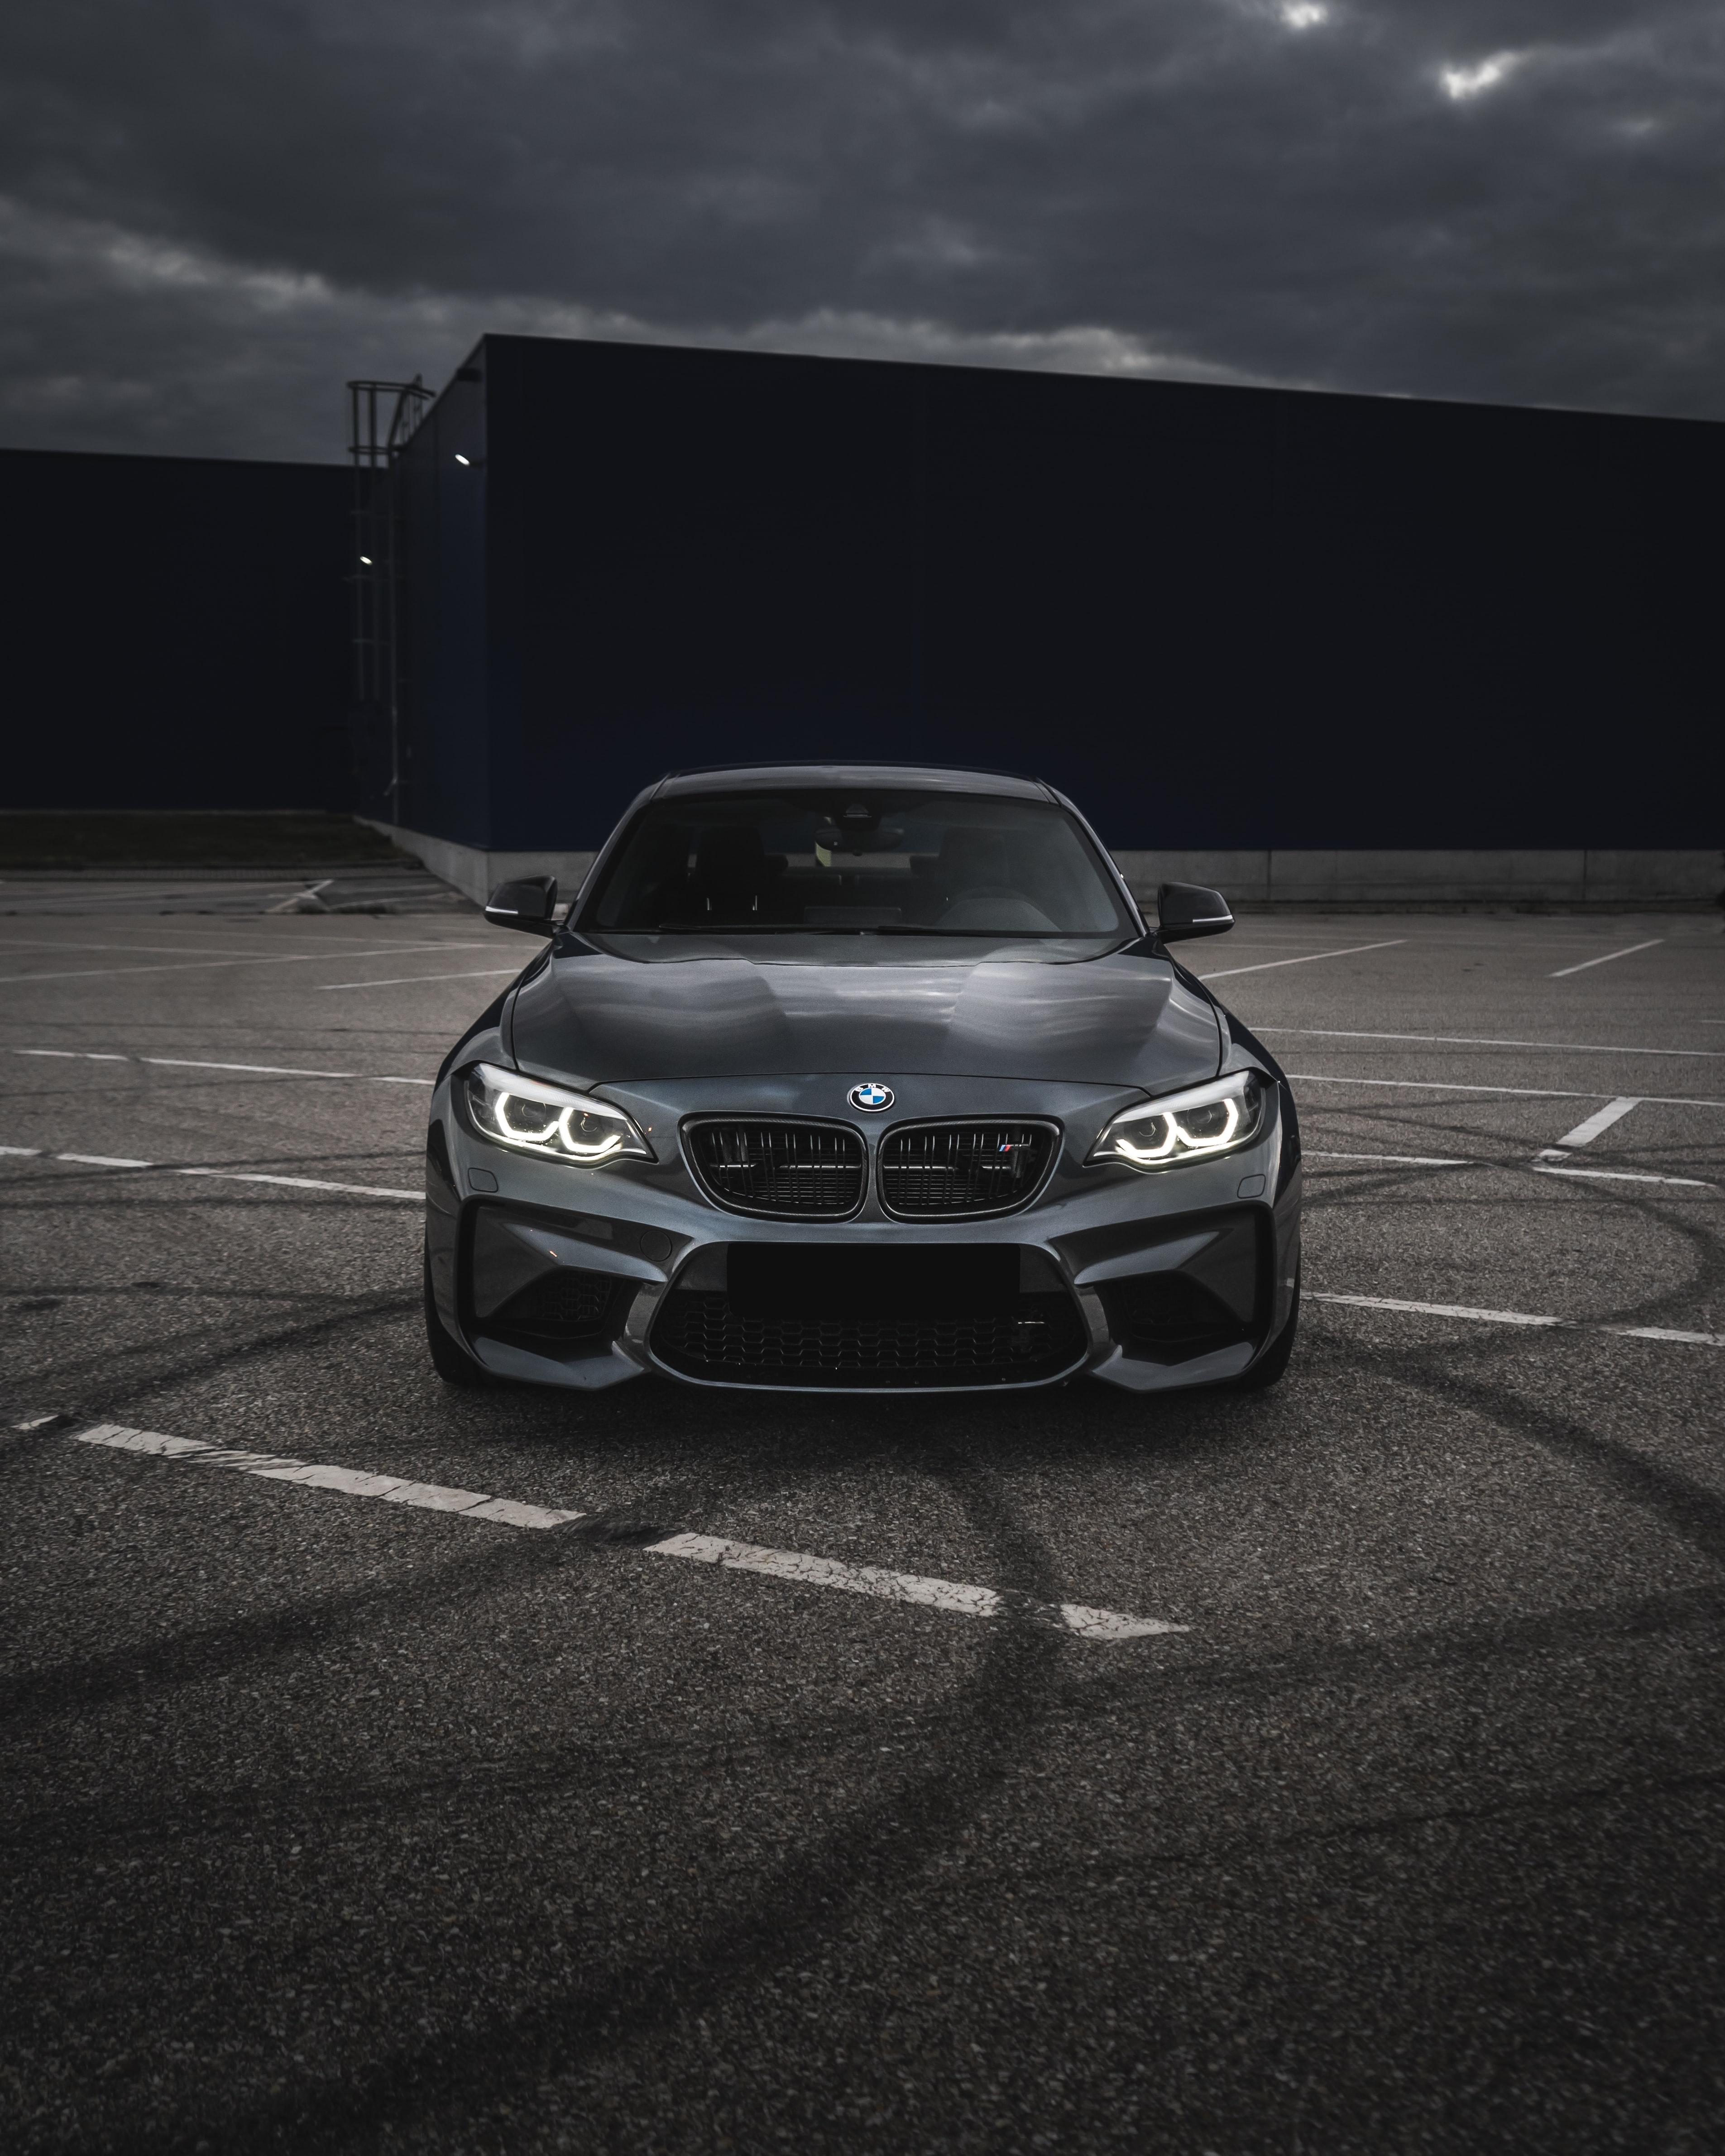 bmw, bmw m3, front view, cars, car, grey